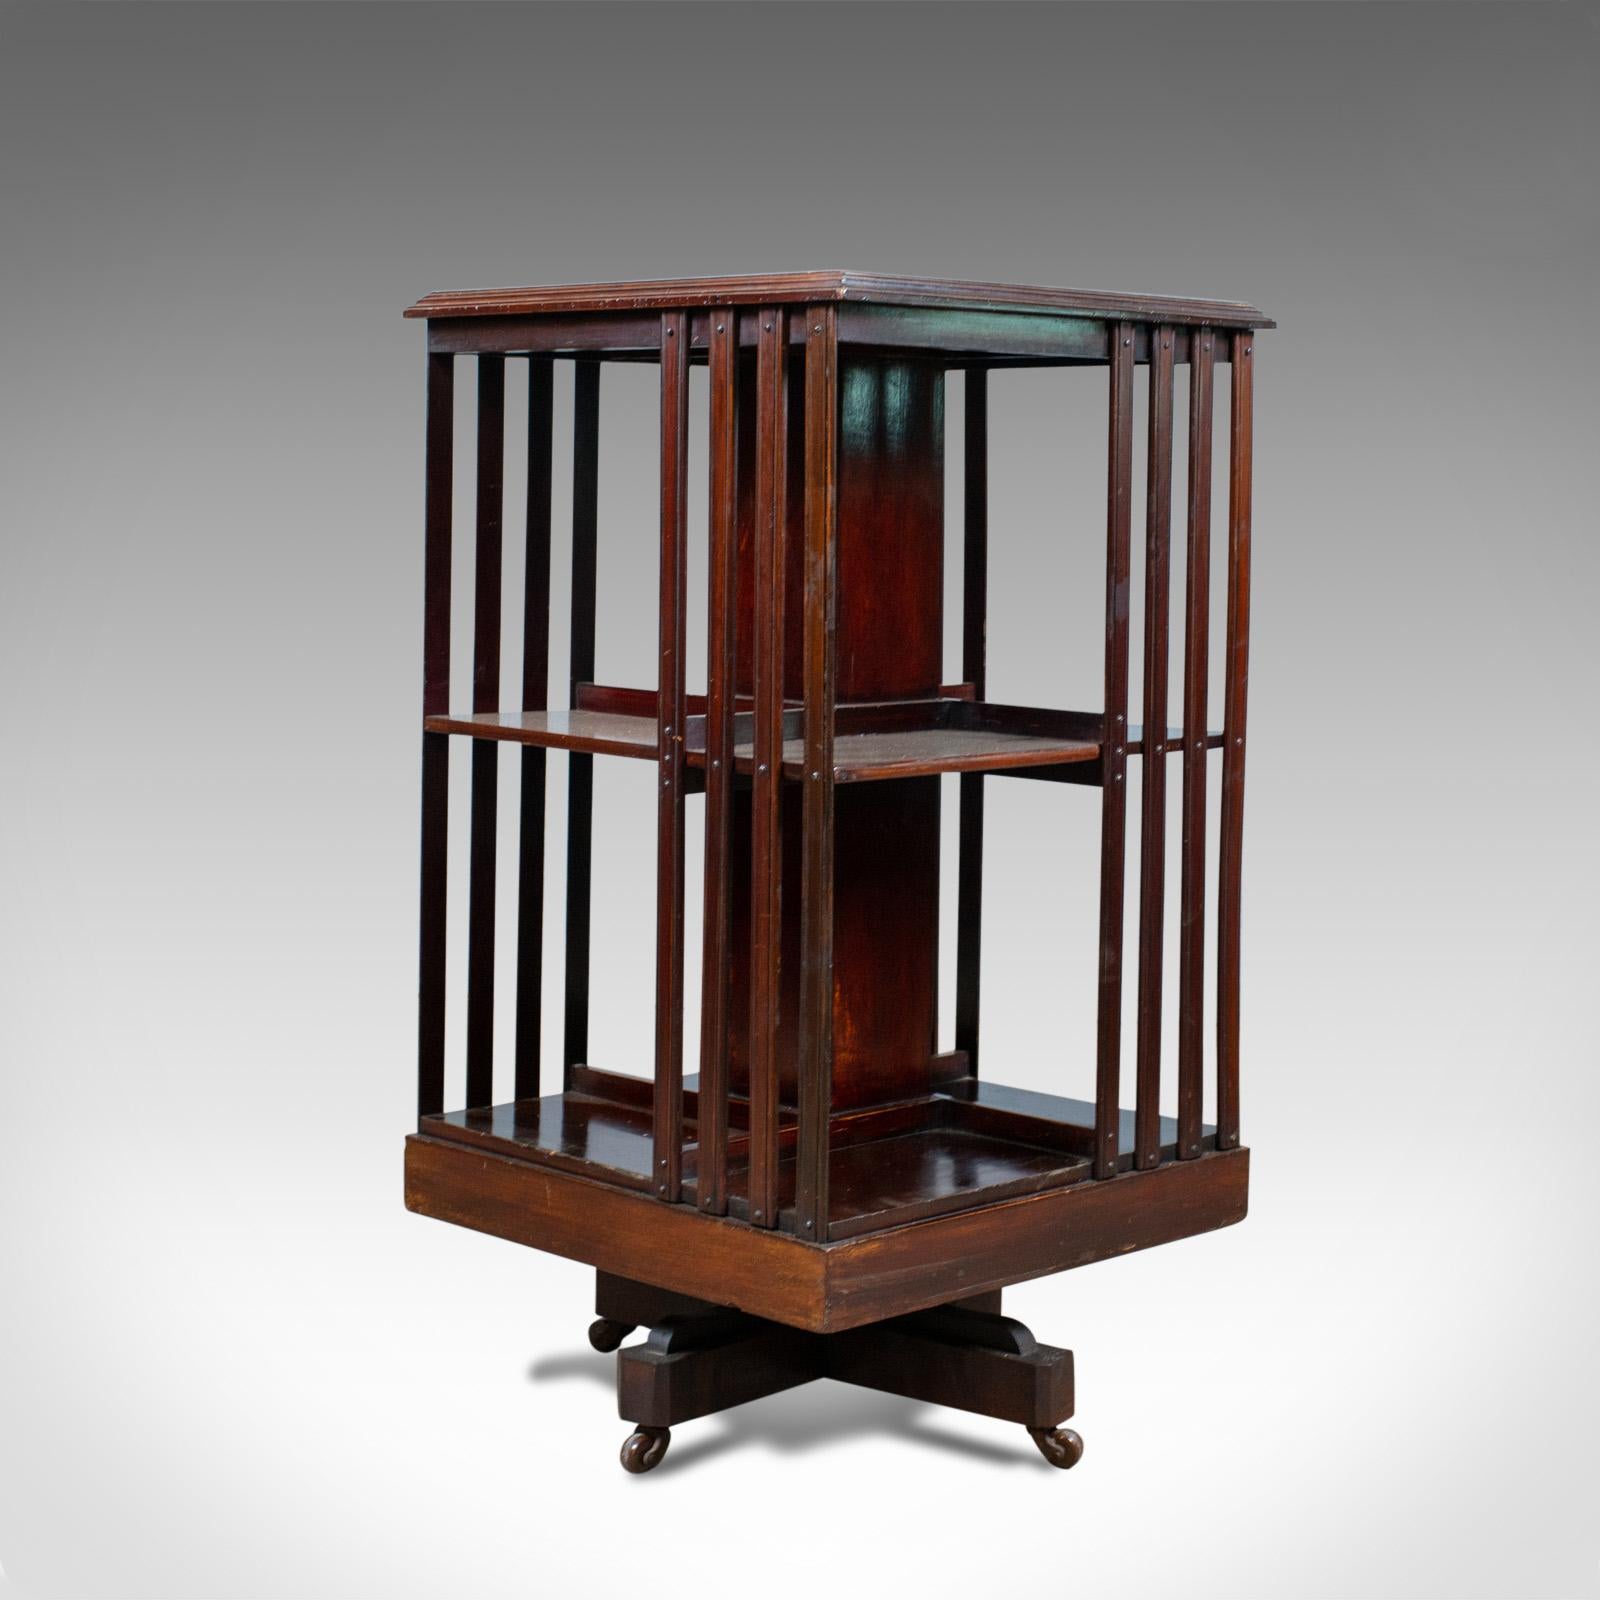 This is an antique revolving bookcase. An English, Edwardian, walnut bookshelf dating to the early 20th century, circa 1910.

Walnut with satinwood crossbanding, evocative of the period
tabletop displaying good grain detail and a moulded edge